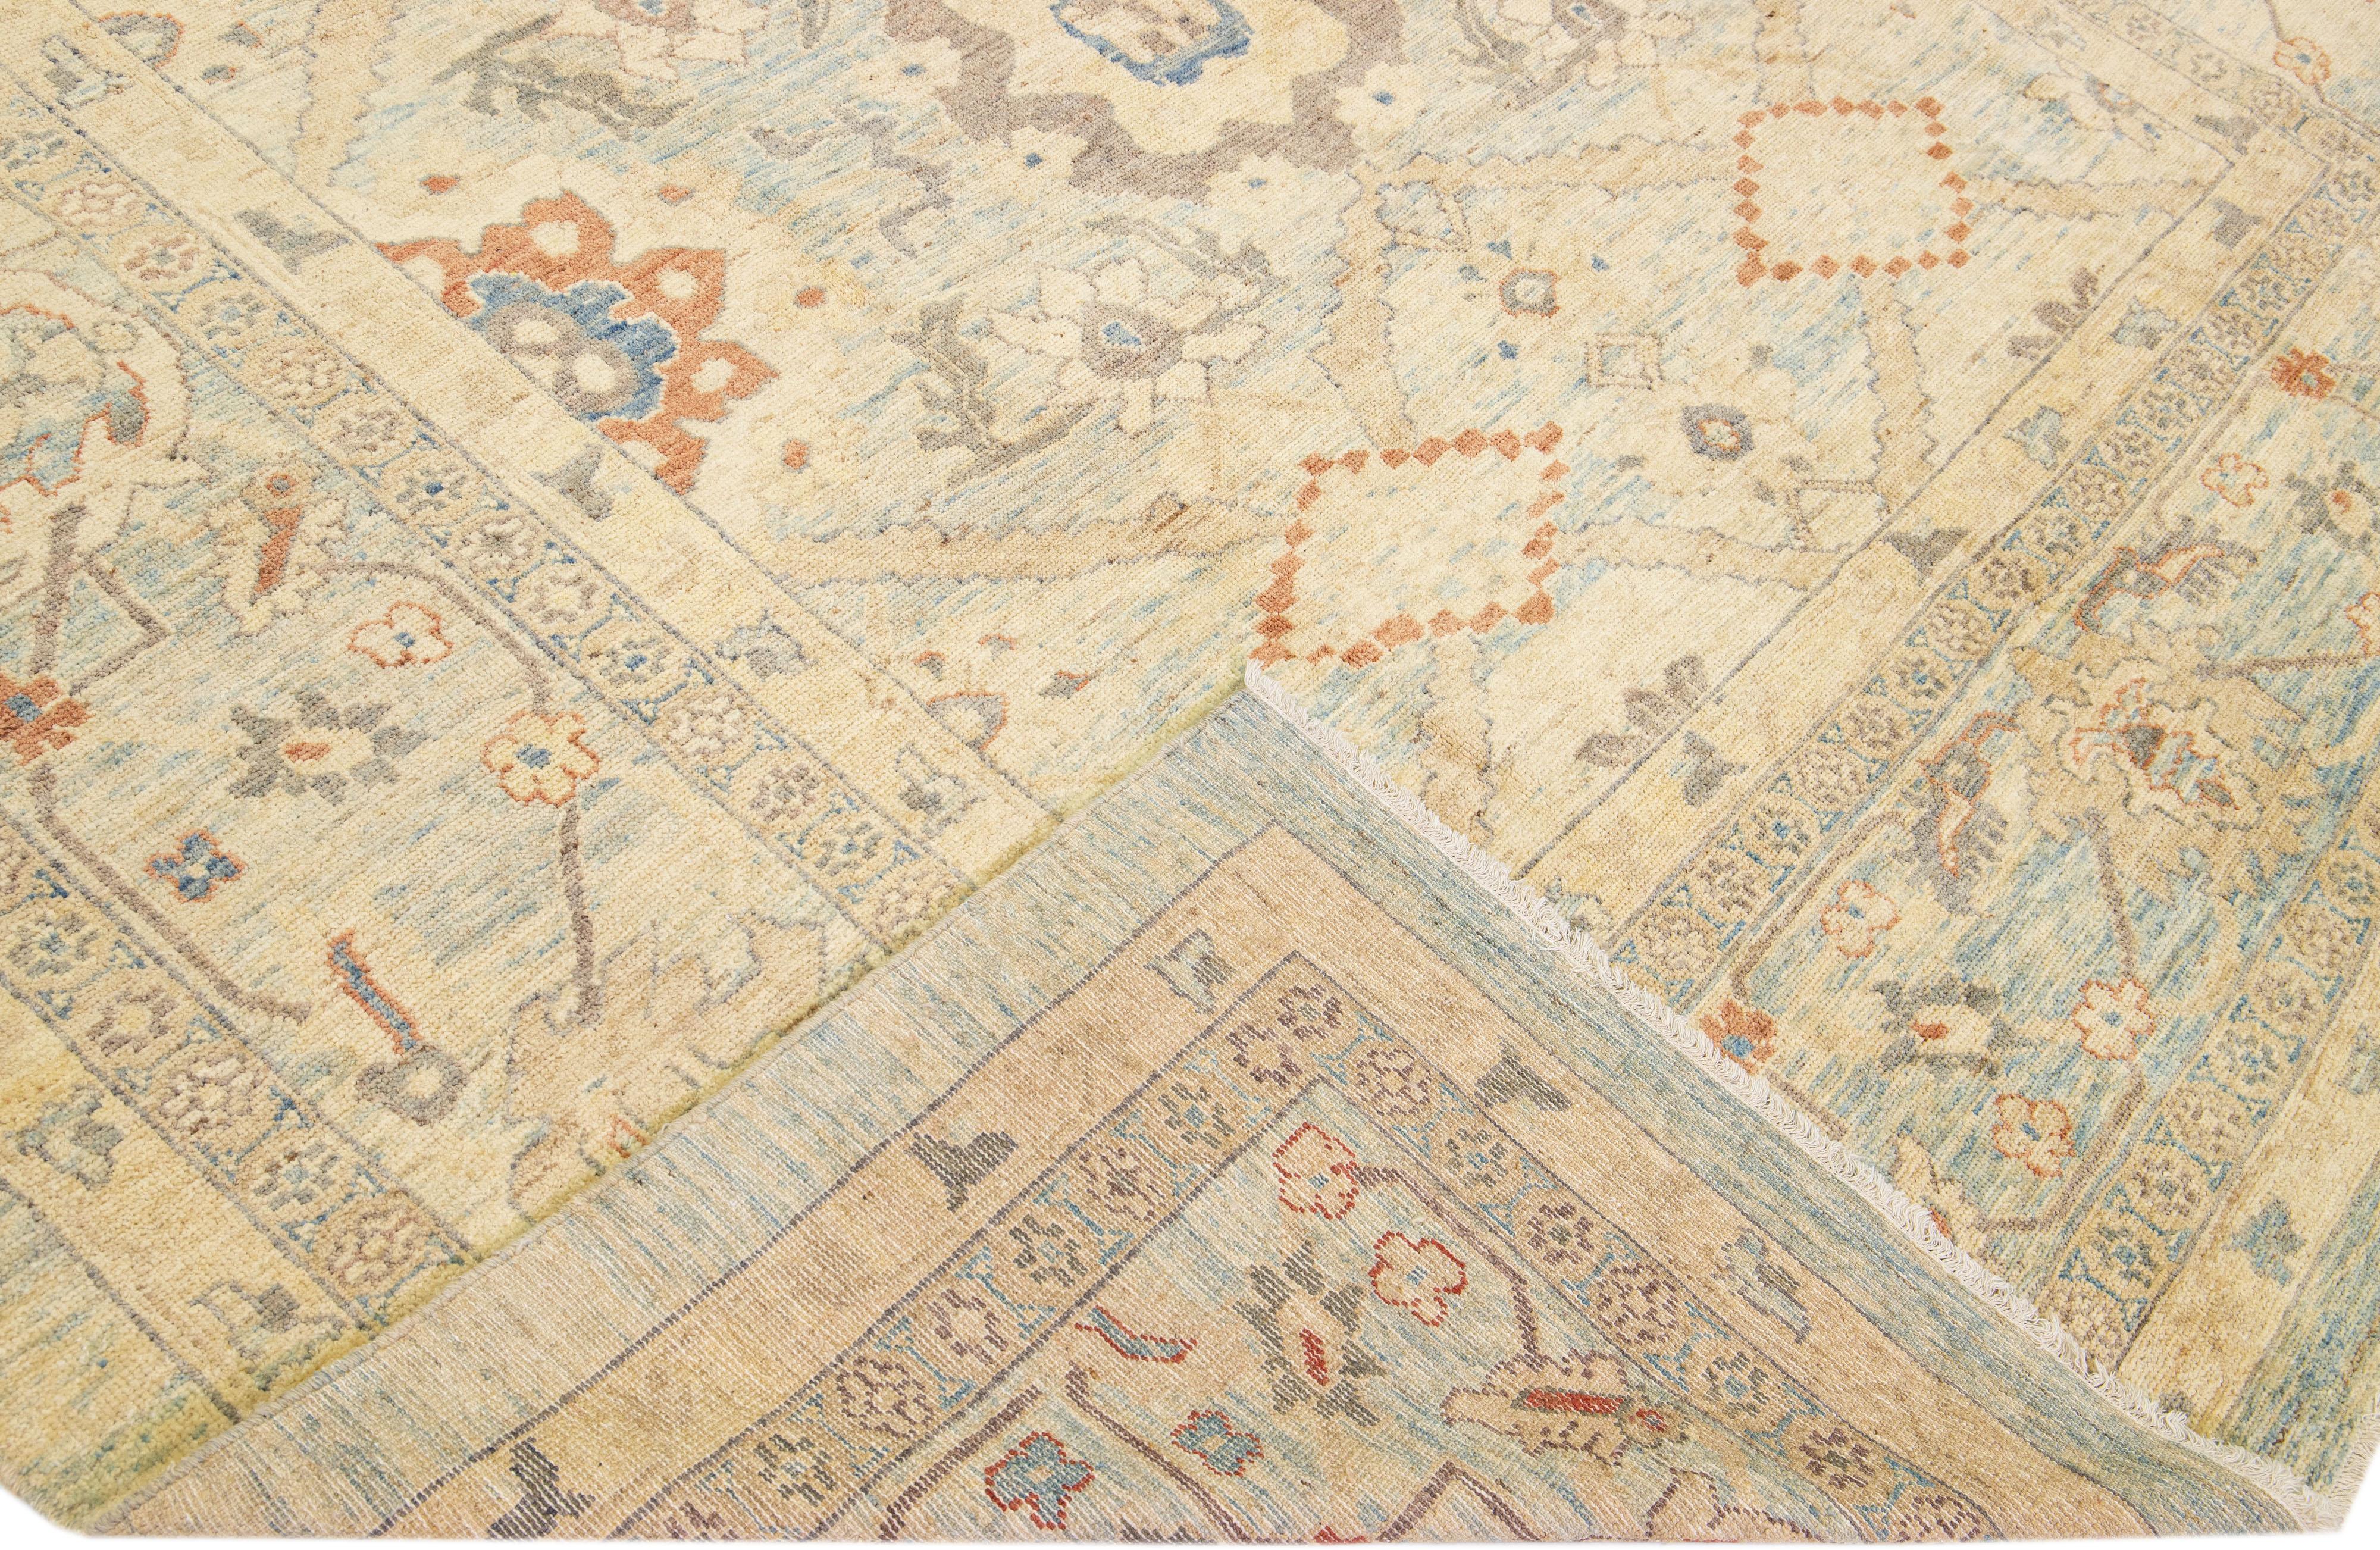 Beautiful modern hand-knotted wool rug with a Blue color field. This Indian Piece has beige, rust, and blue accent colors in a gorgeous all-over floral design.

This rug measures: 10'1